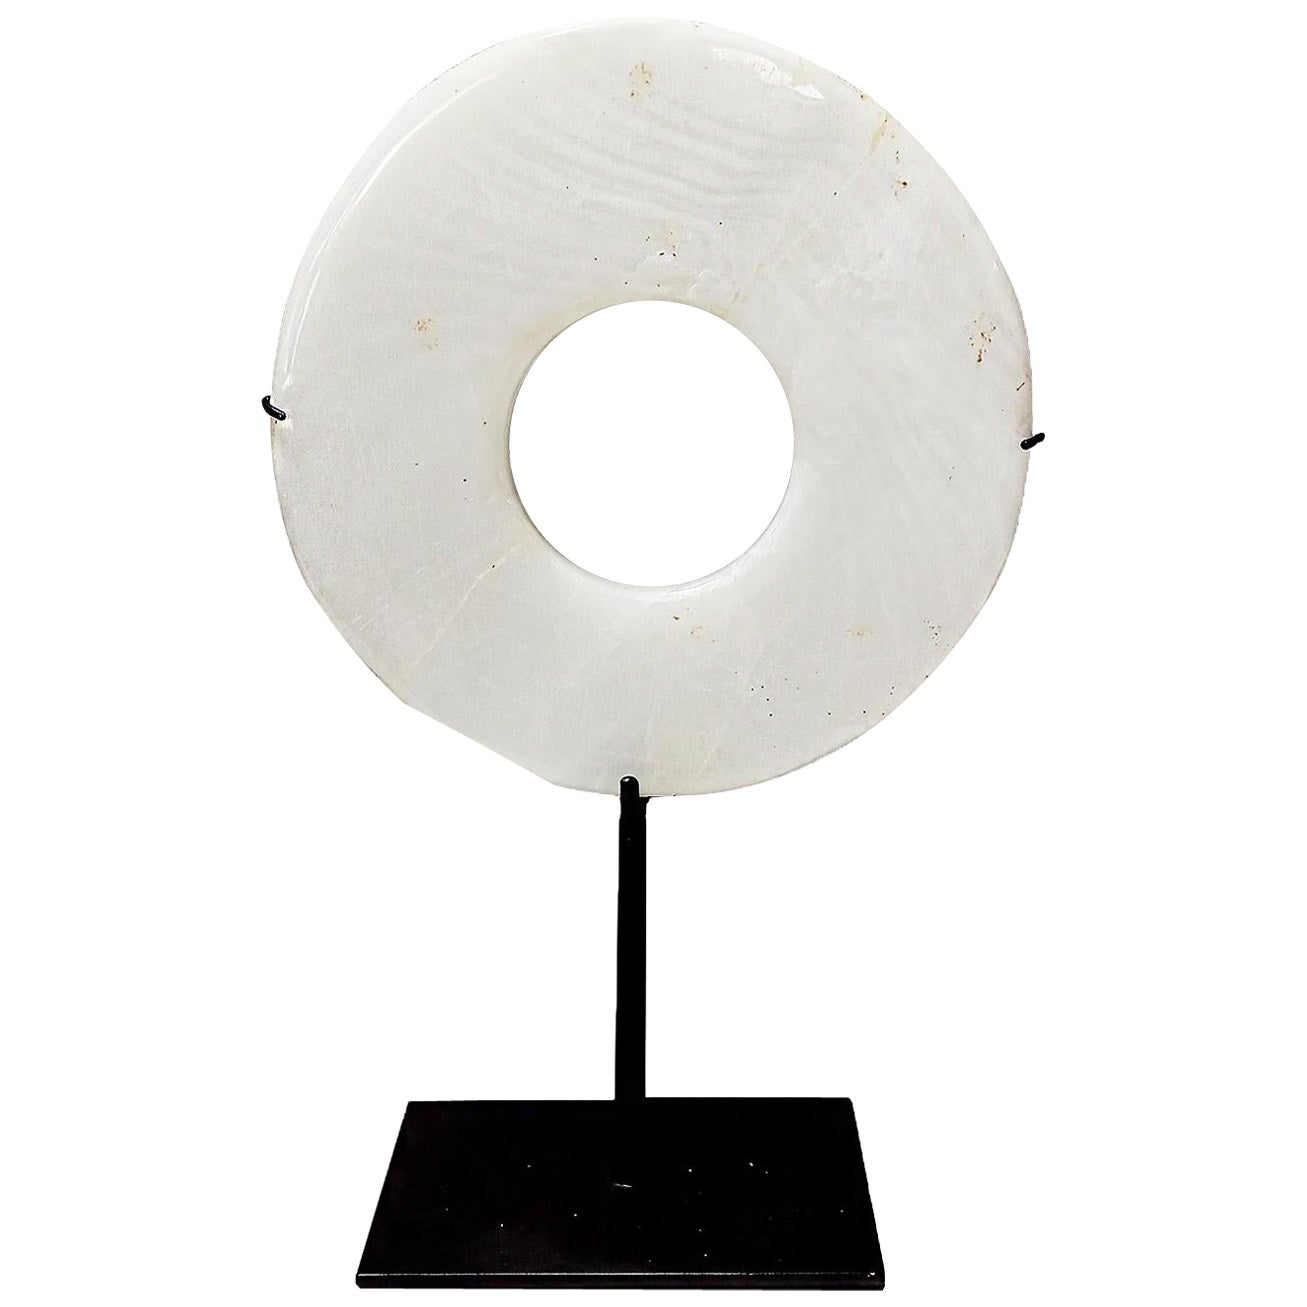  Stone Disk from Indonesia, Mounted